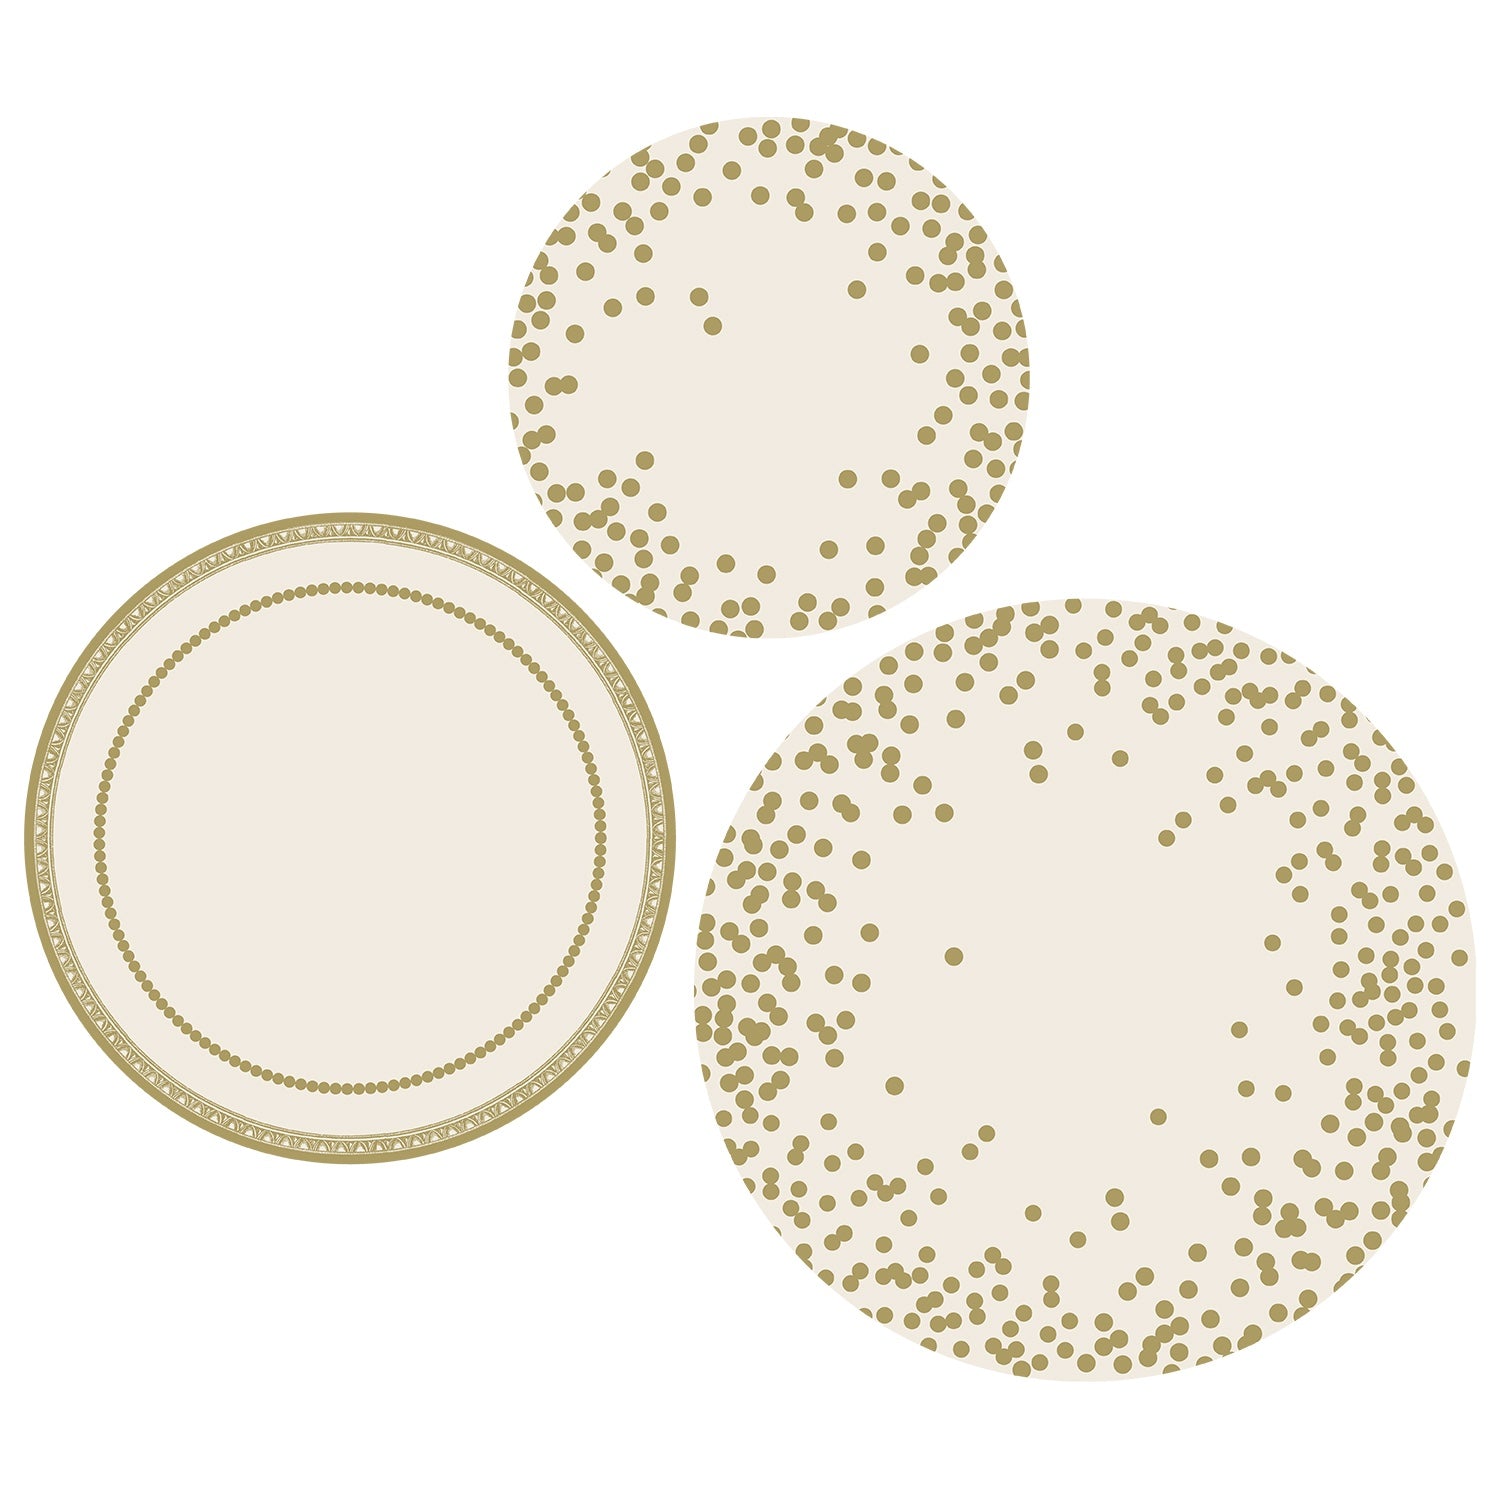 Three circular, die-cut white paper serving papers in three different sizes with gold embellishments. The small and large circles feature gold dots scattered around the edges, and the middle size features ornate embellishments around the edges, resembling a plate.